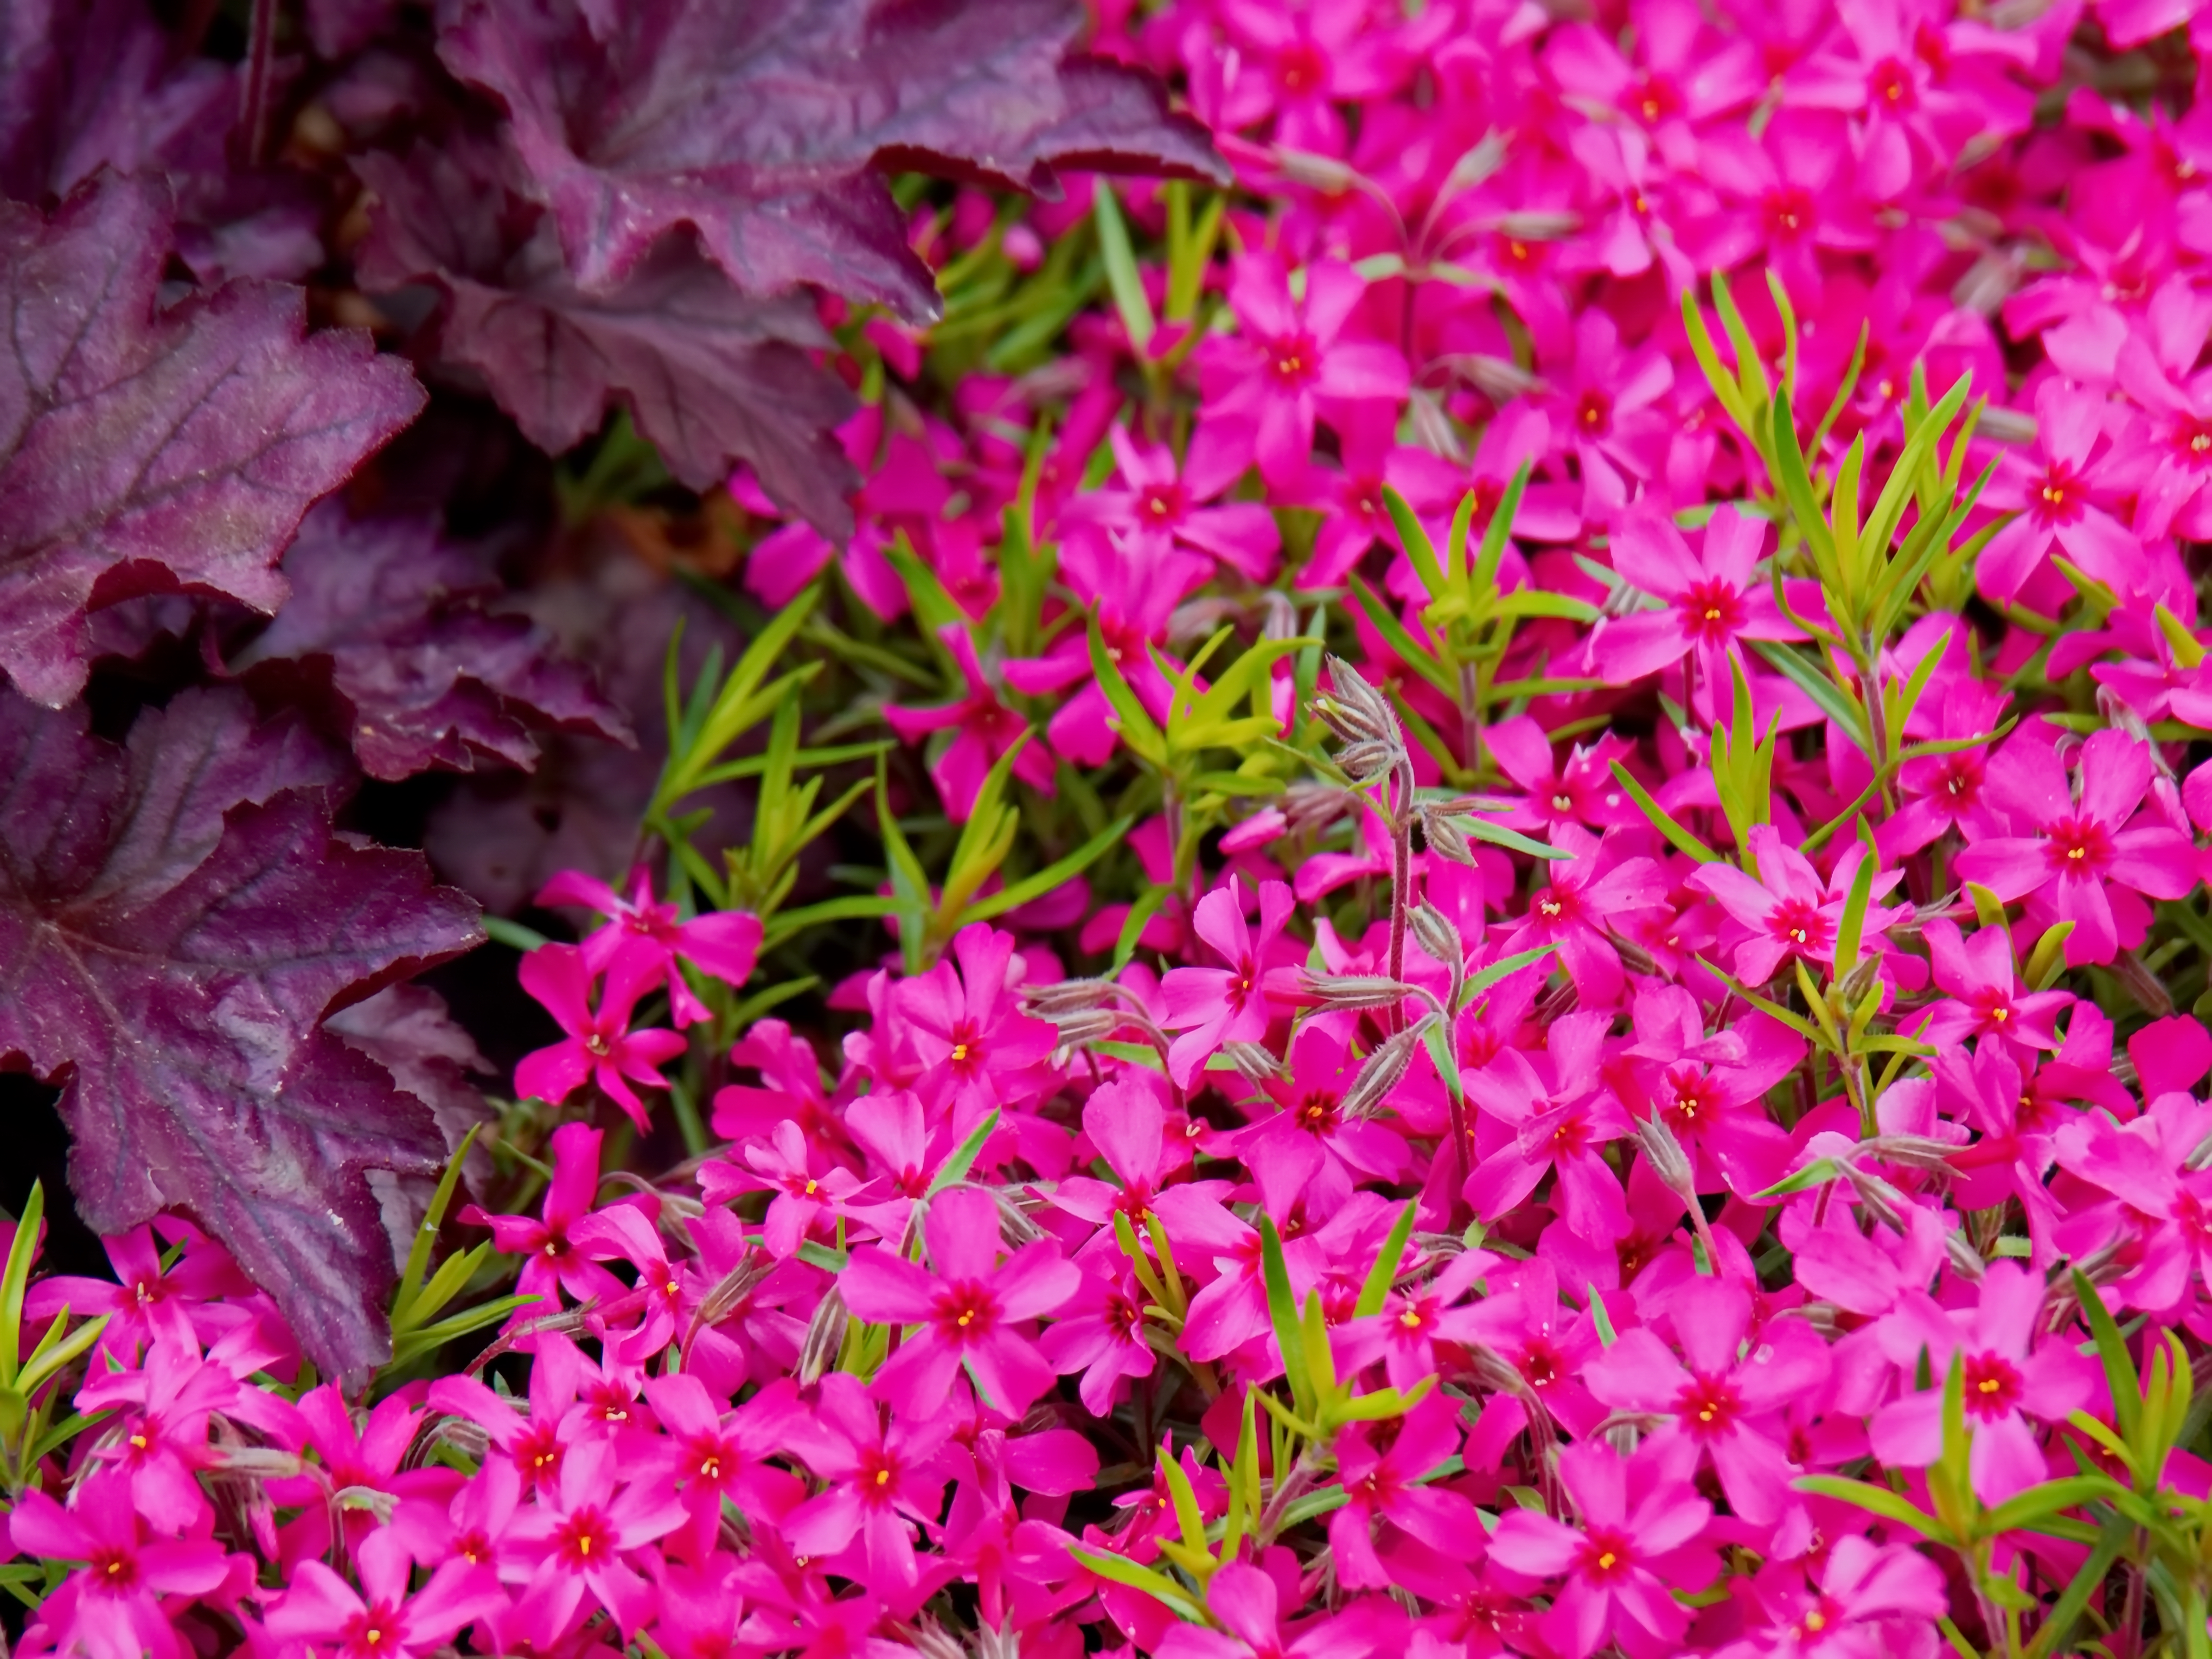 A shrub of pink little flowers